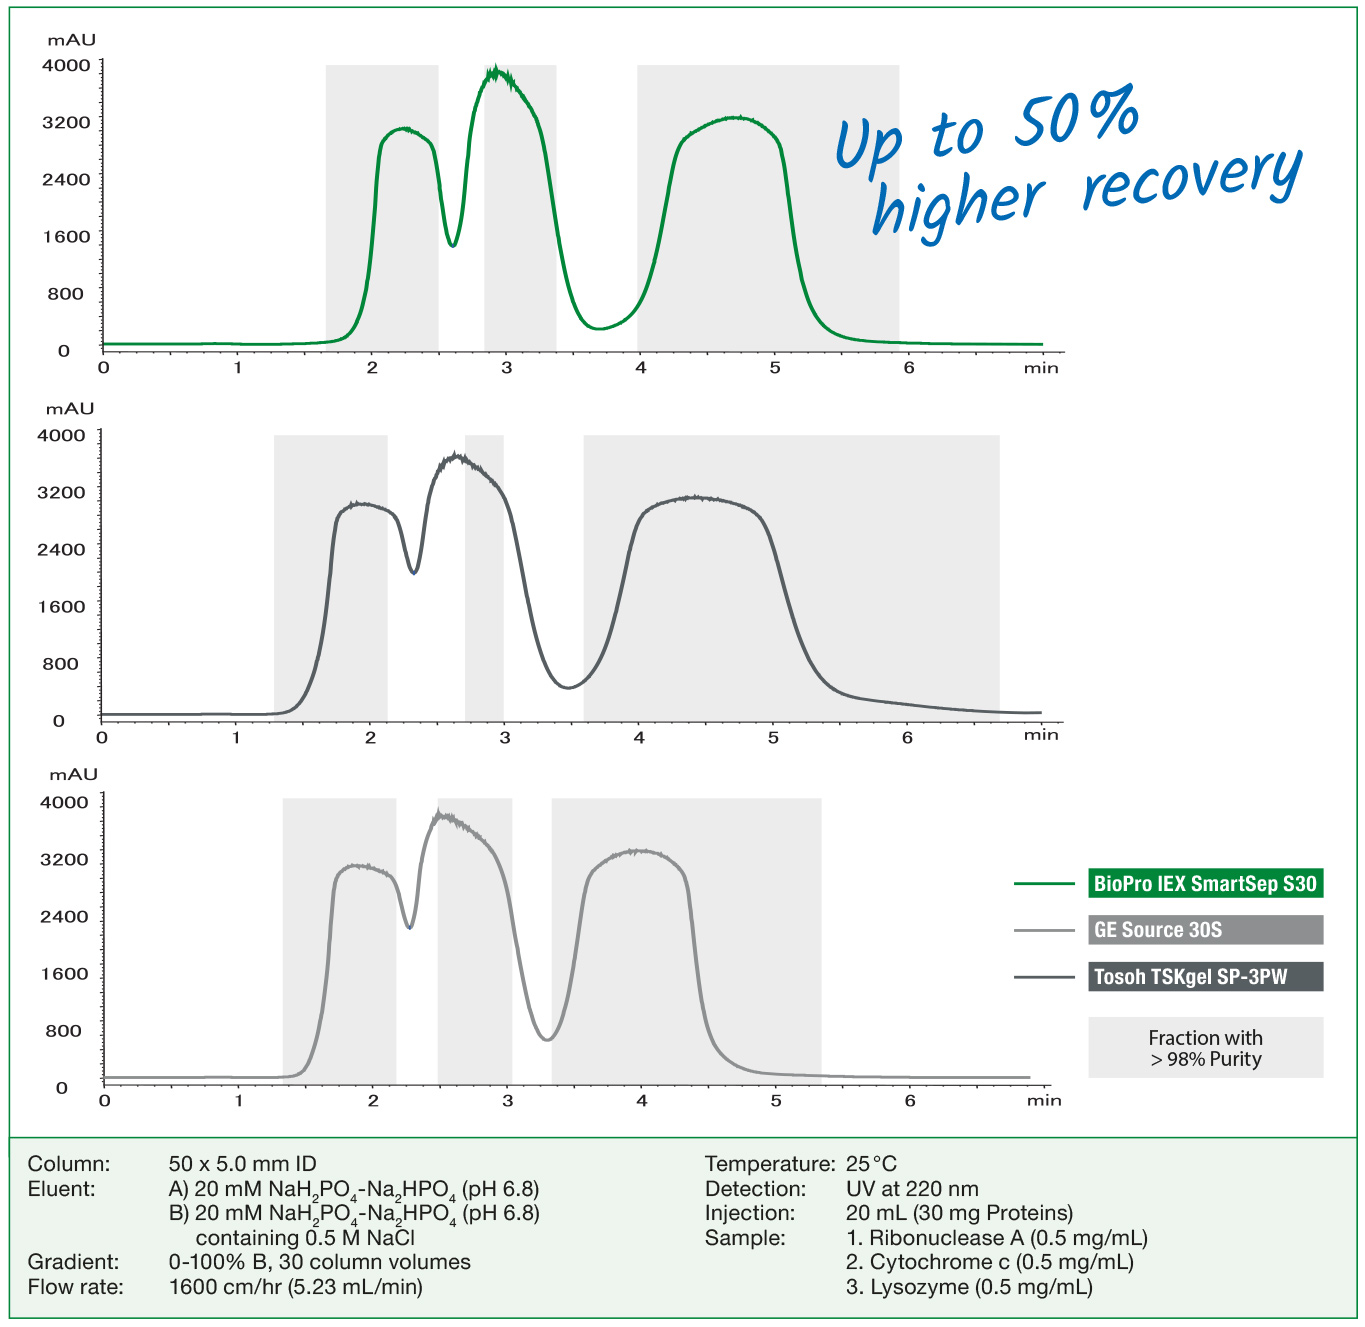 The image shows a comparison of different ion exchange resins for protein purification (Lysozyme, Ribonuclease A, Cytochrome c). BioPro IEX revealed the best resolution and highest recovery.